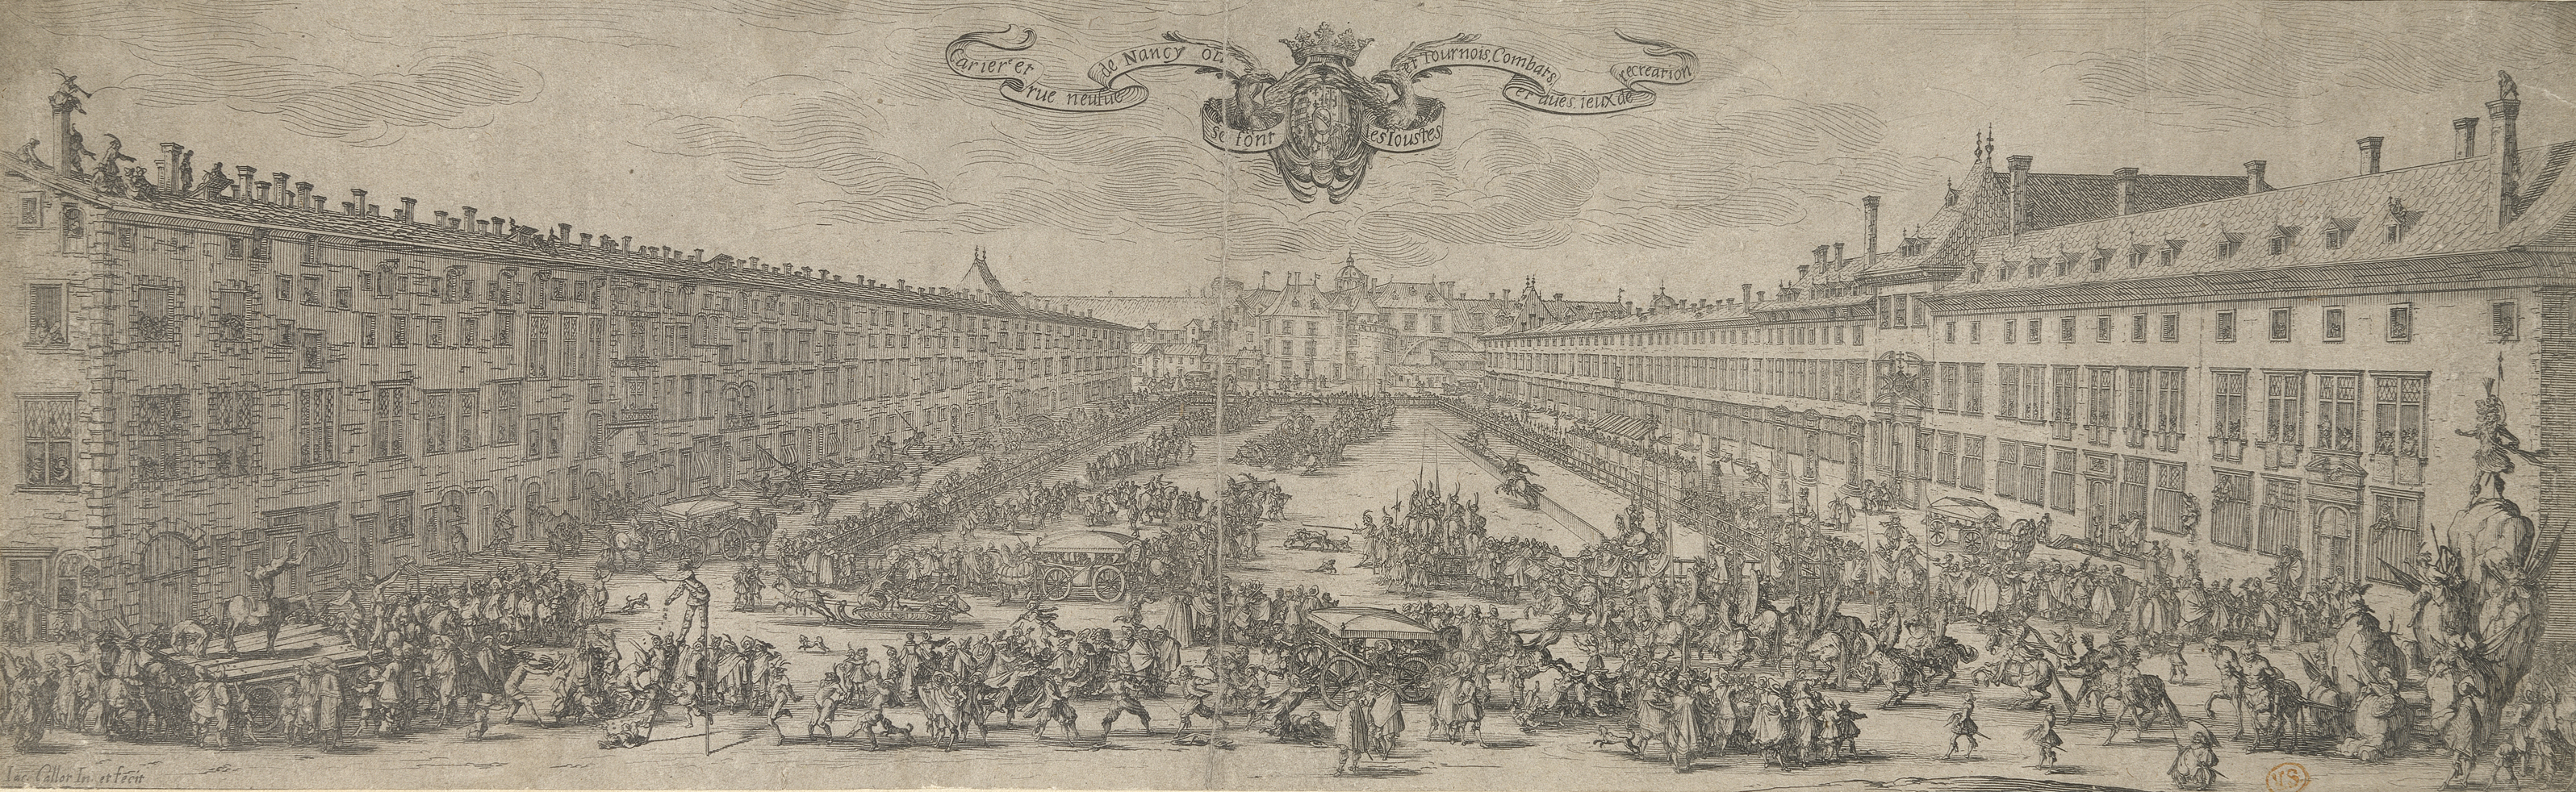 Jacques Callot, La Carrière in Nancy, 1622, Musea Brugge, 157 mm x 510 mm, inv. 0000.GRO3273.III, CC0, image artinflanders.be